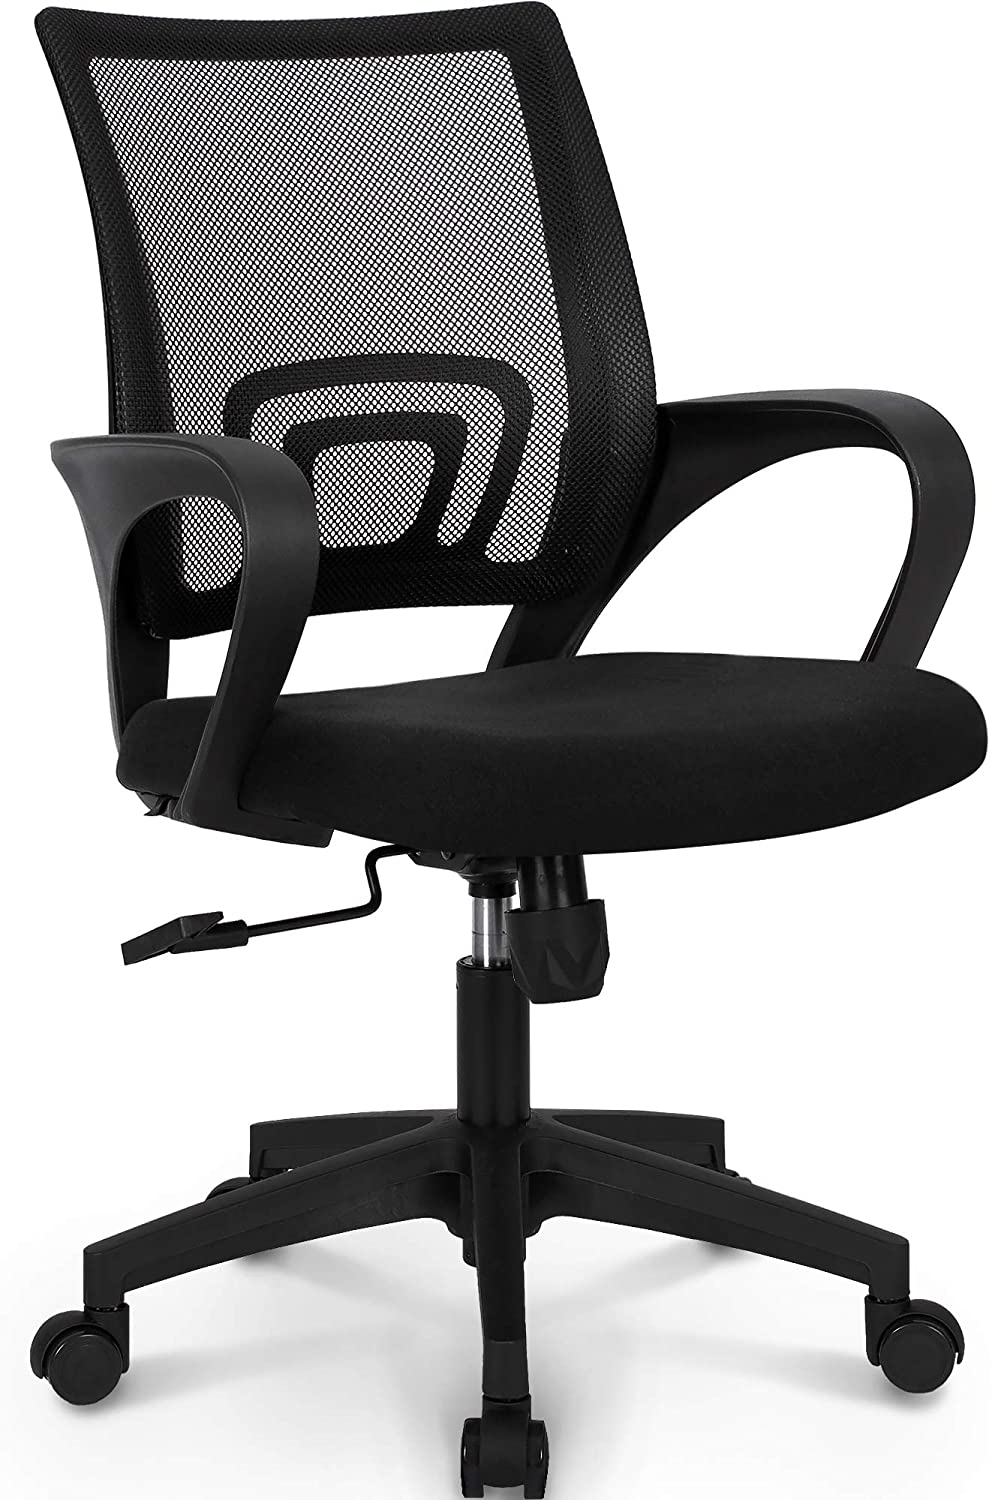 Neo Chair Office Gaming Desk Chair Black